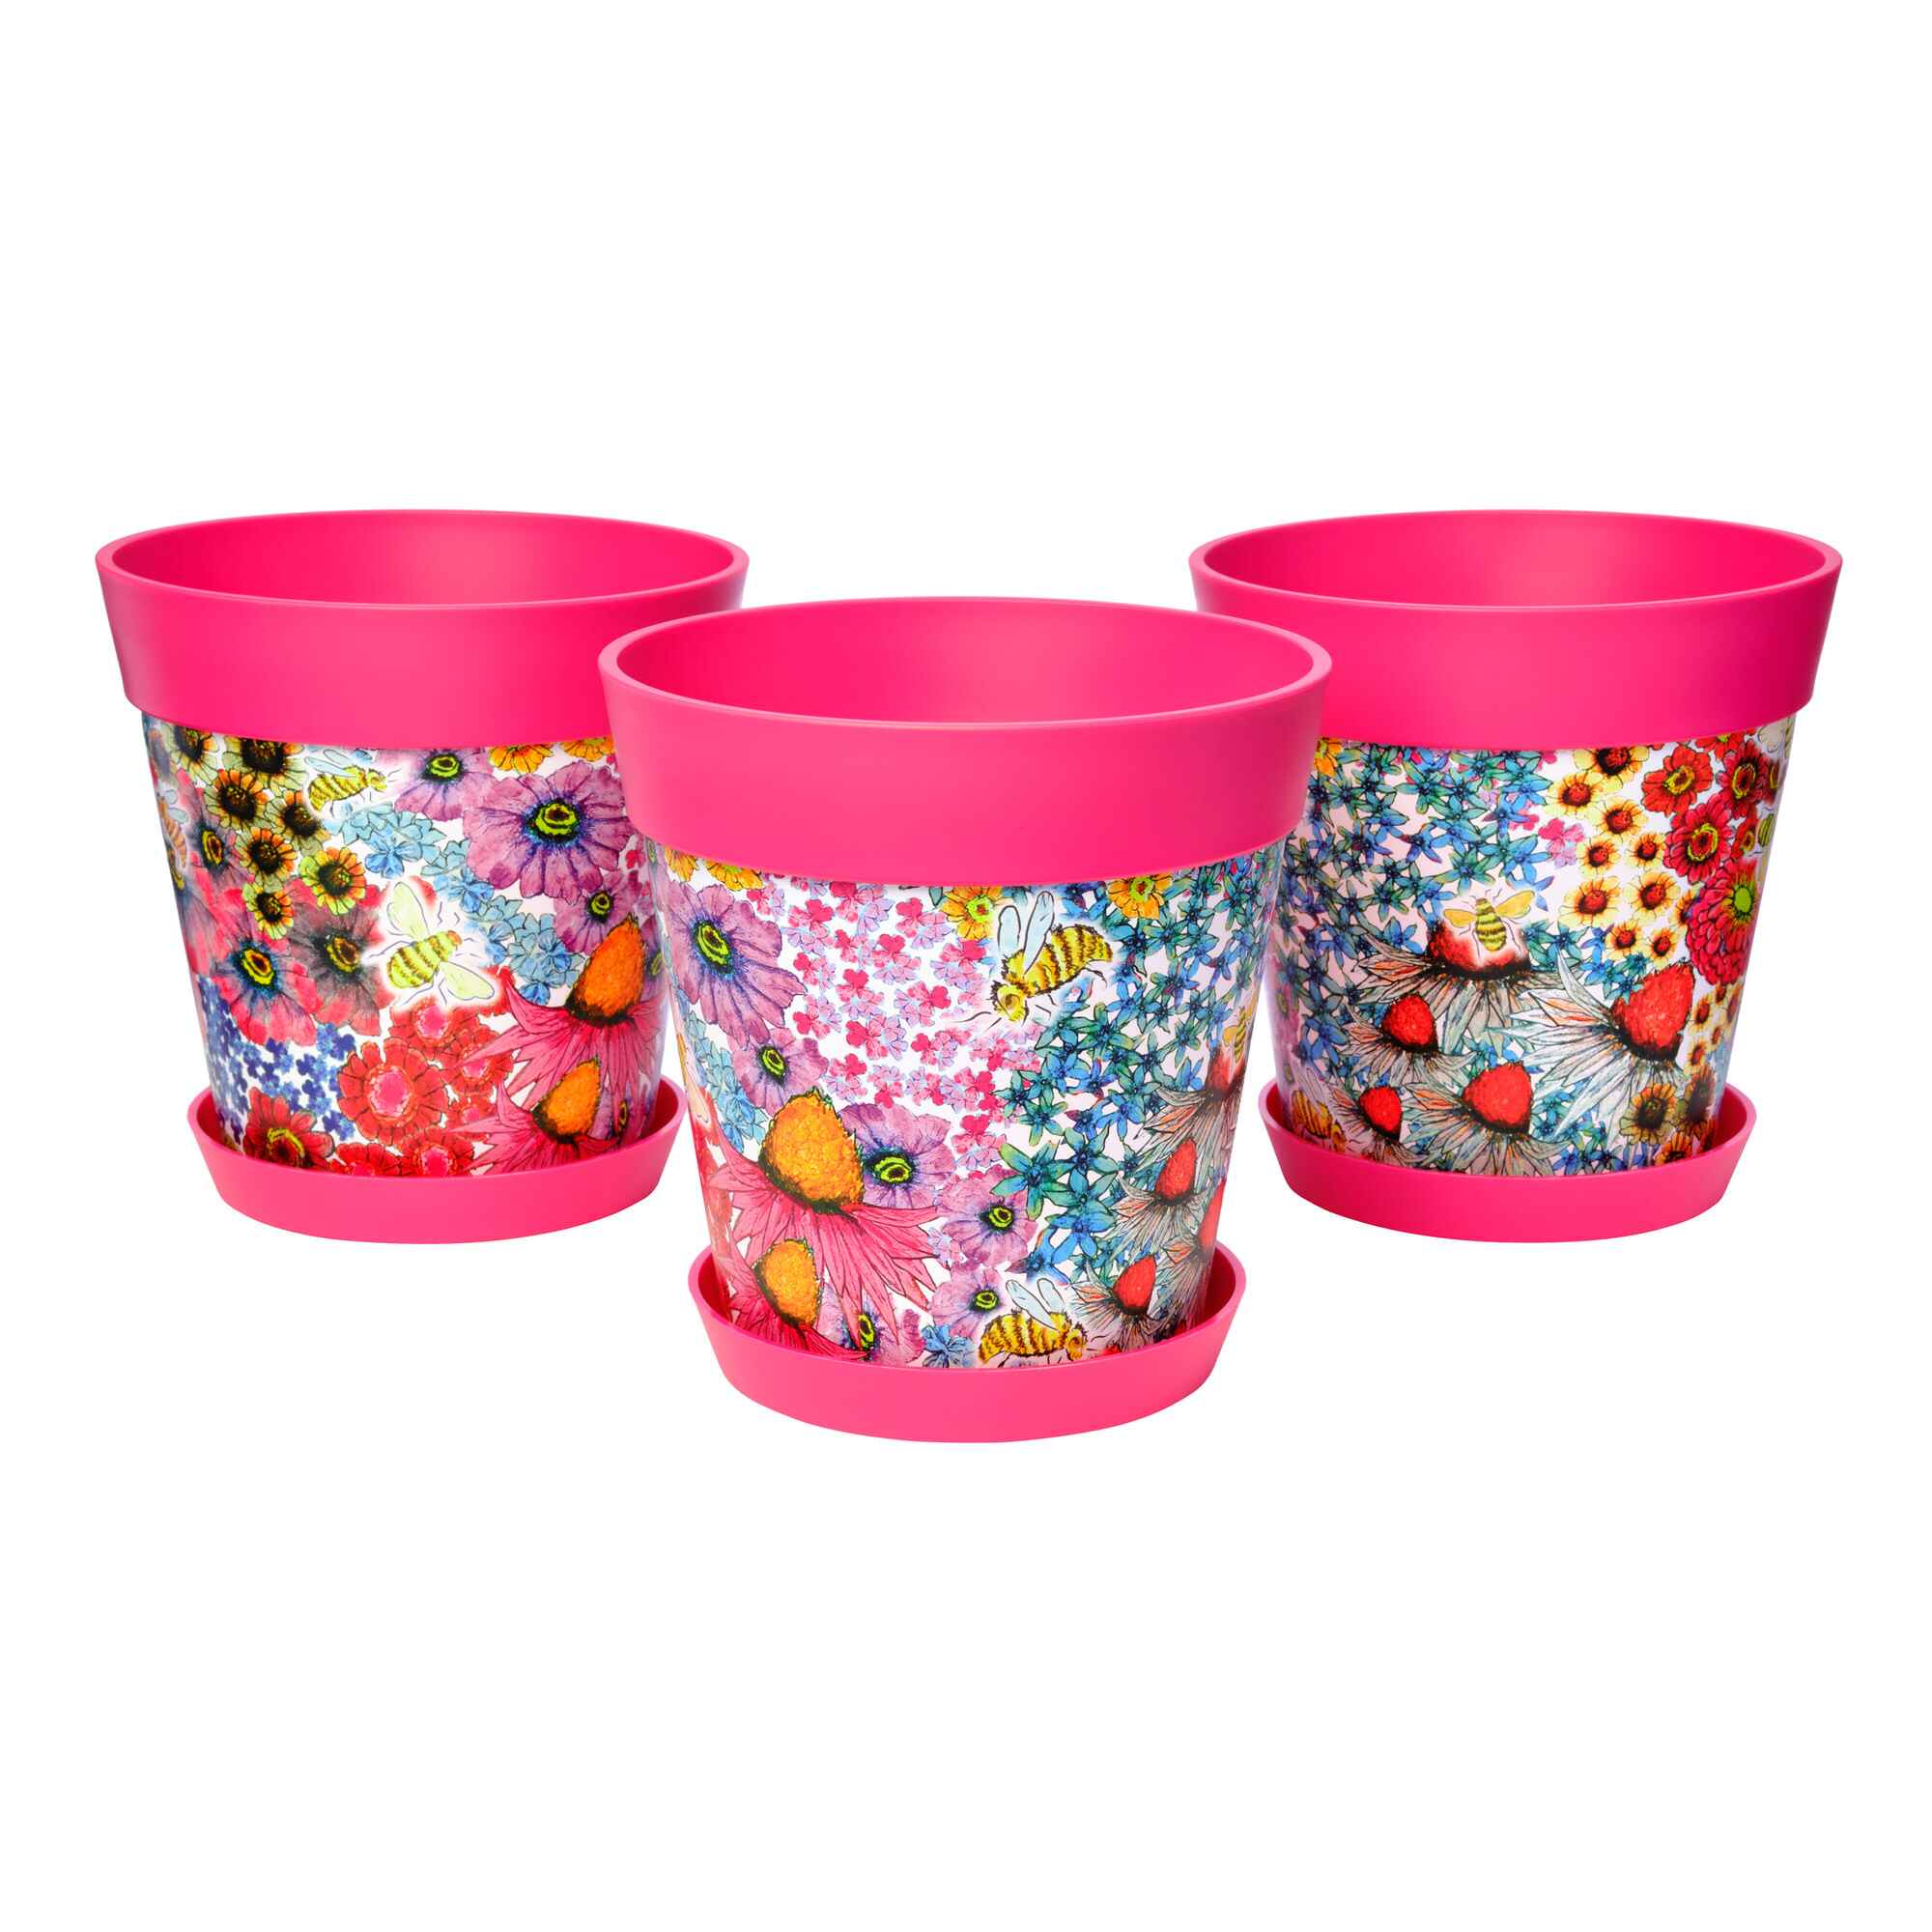 Picture of 3 Medium 22cm Plastic Pink Flowers and Bees Pattern Indoor/Outdoor Flowerpots with Saucers 